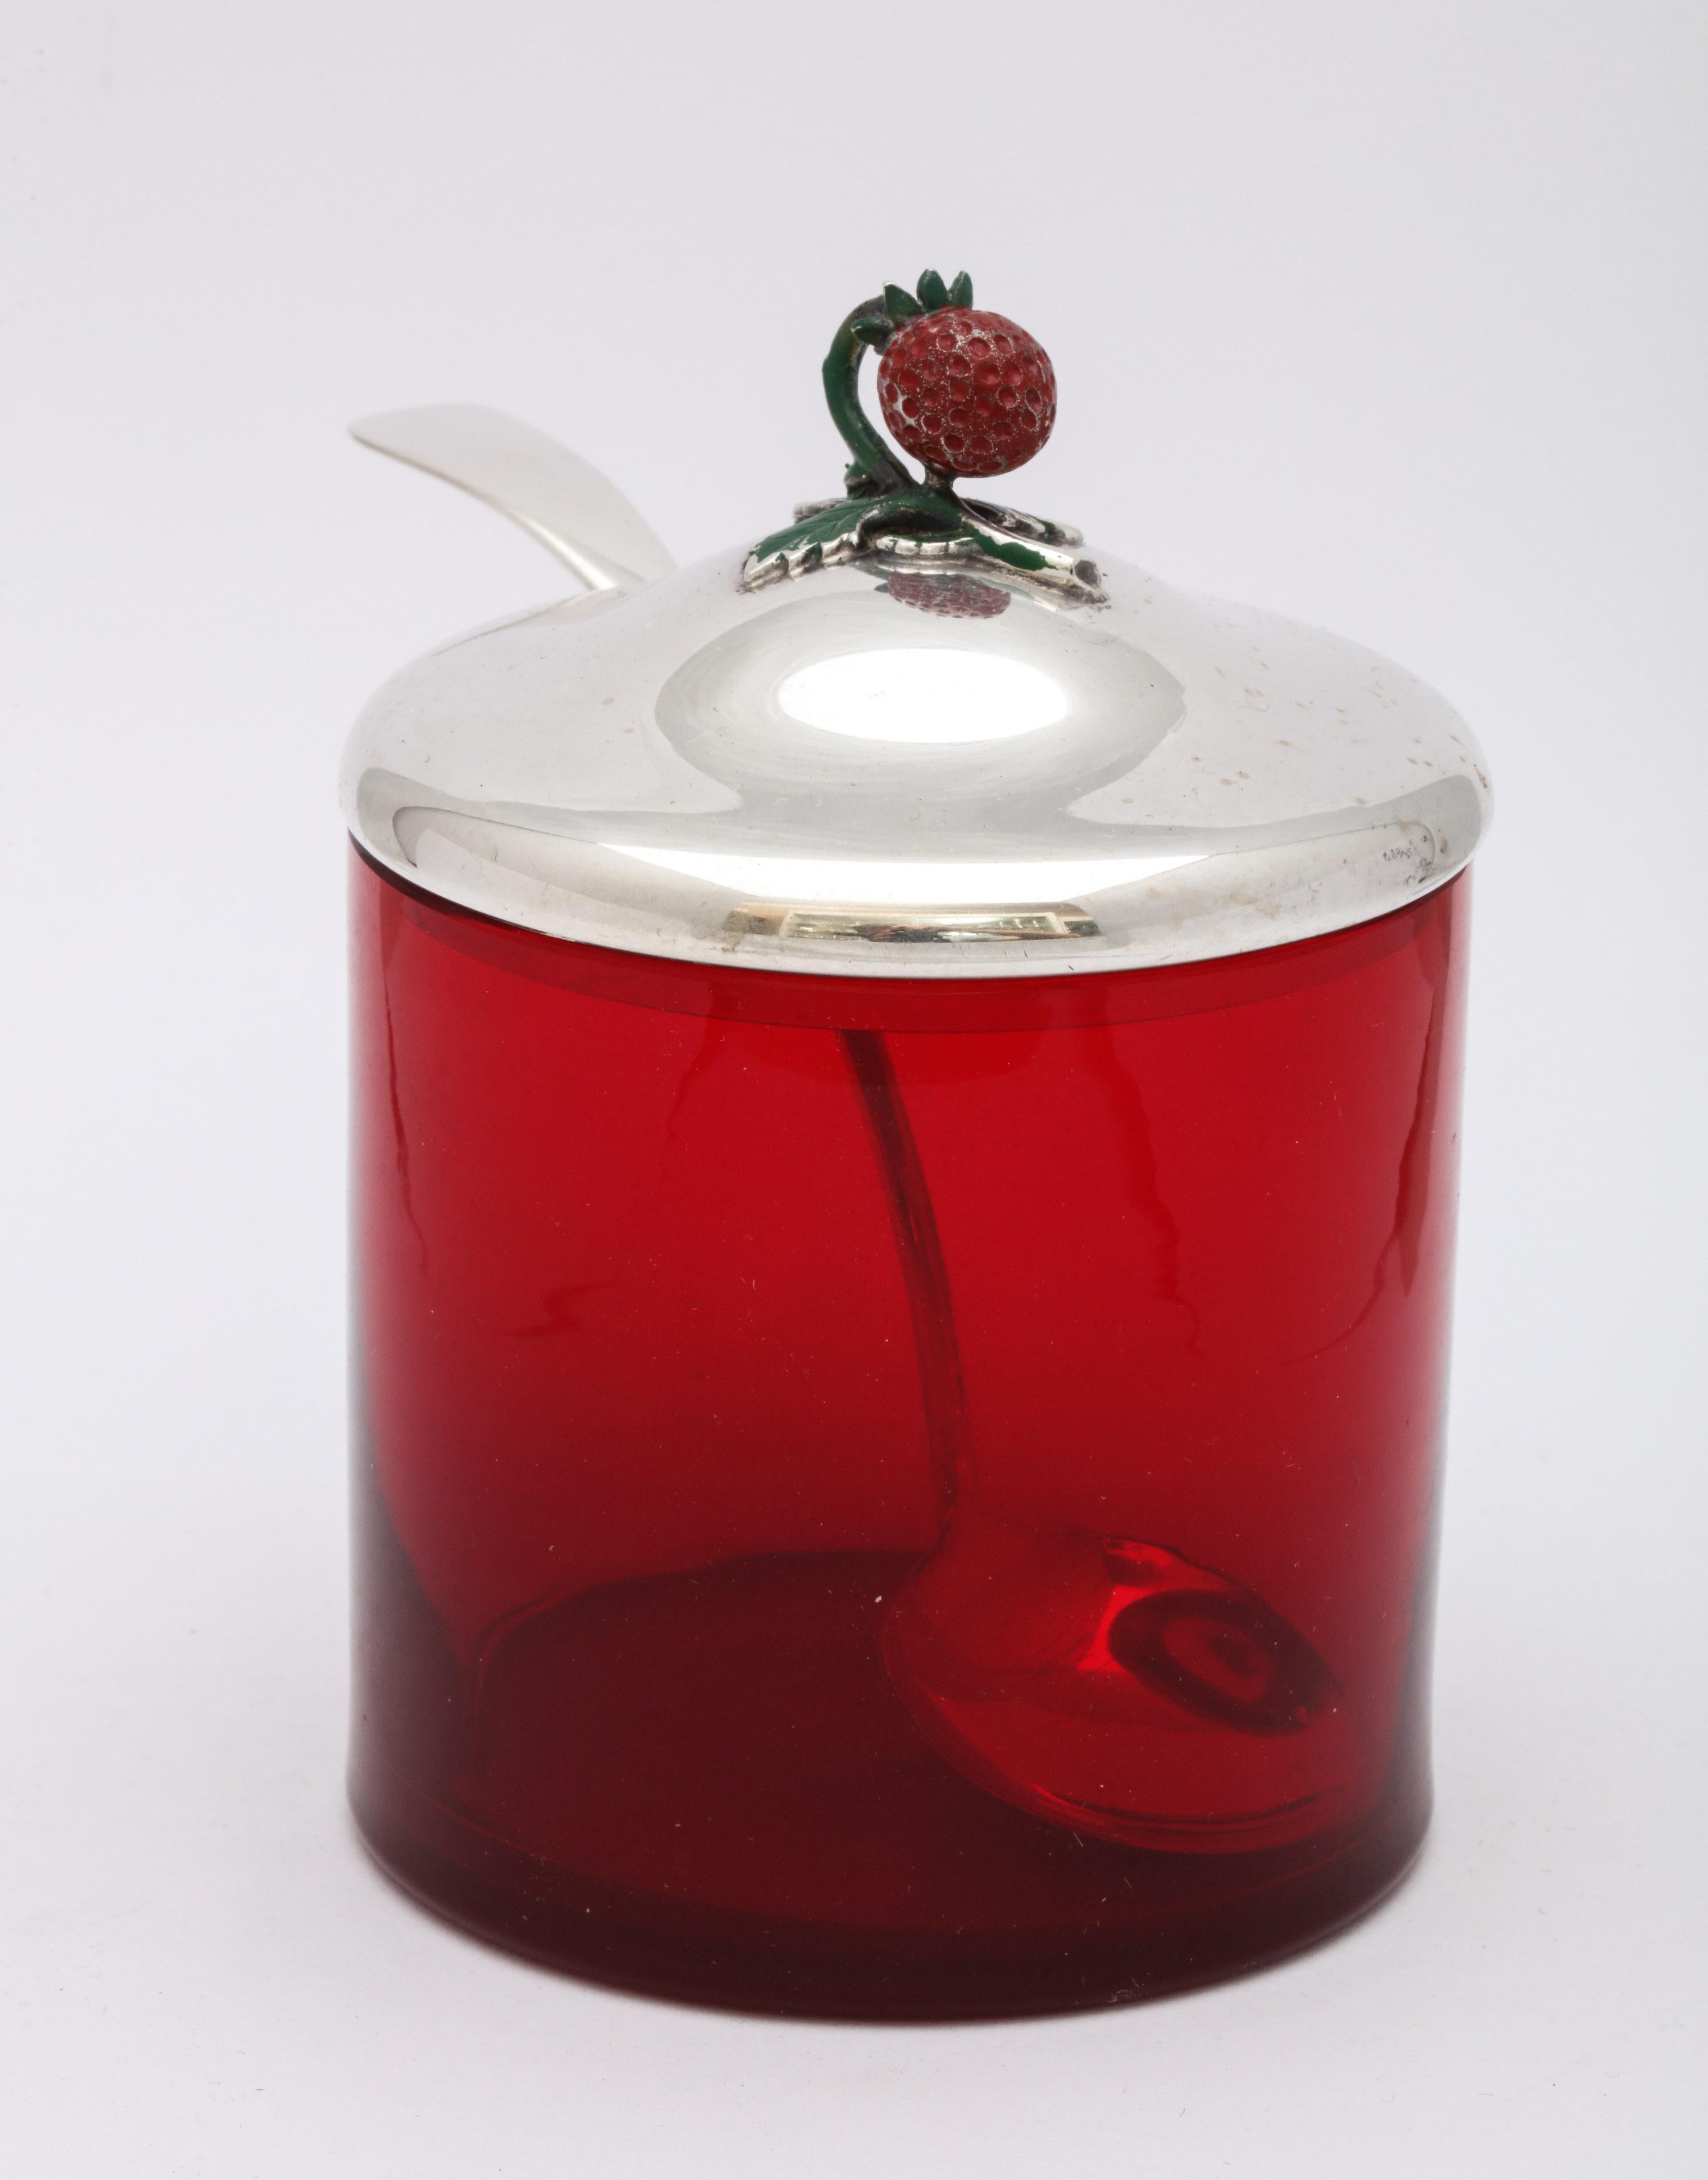 Art Deco, sterling silver-mounted, red glass condiments jar, having an enameled strawberry as a finial, and having its original spoon, R. Blackinton and Co., North Attleboro, Mass., circa 1930s. Measures 4 inches high (to top of finial) x 3 inches